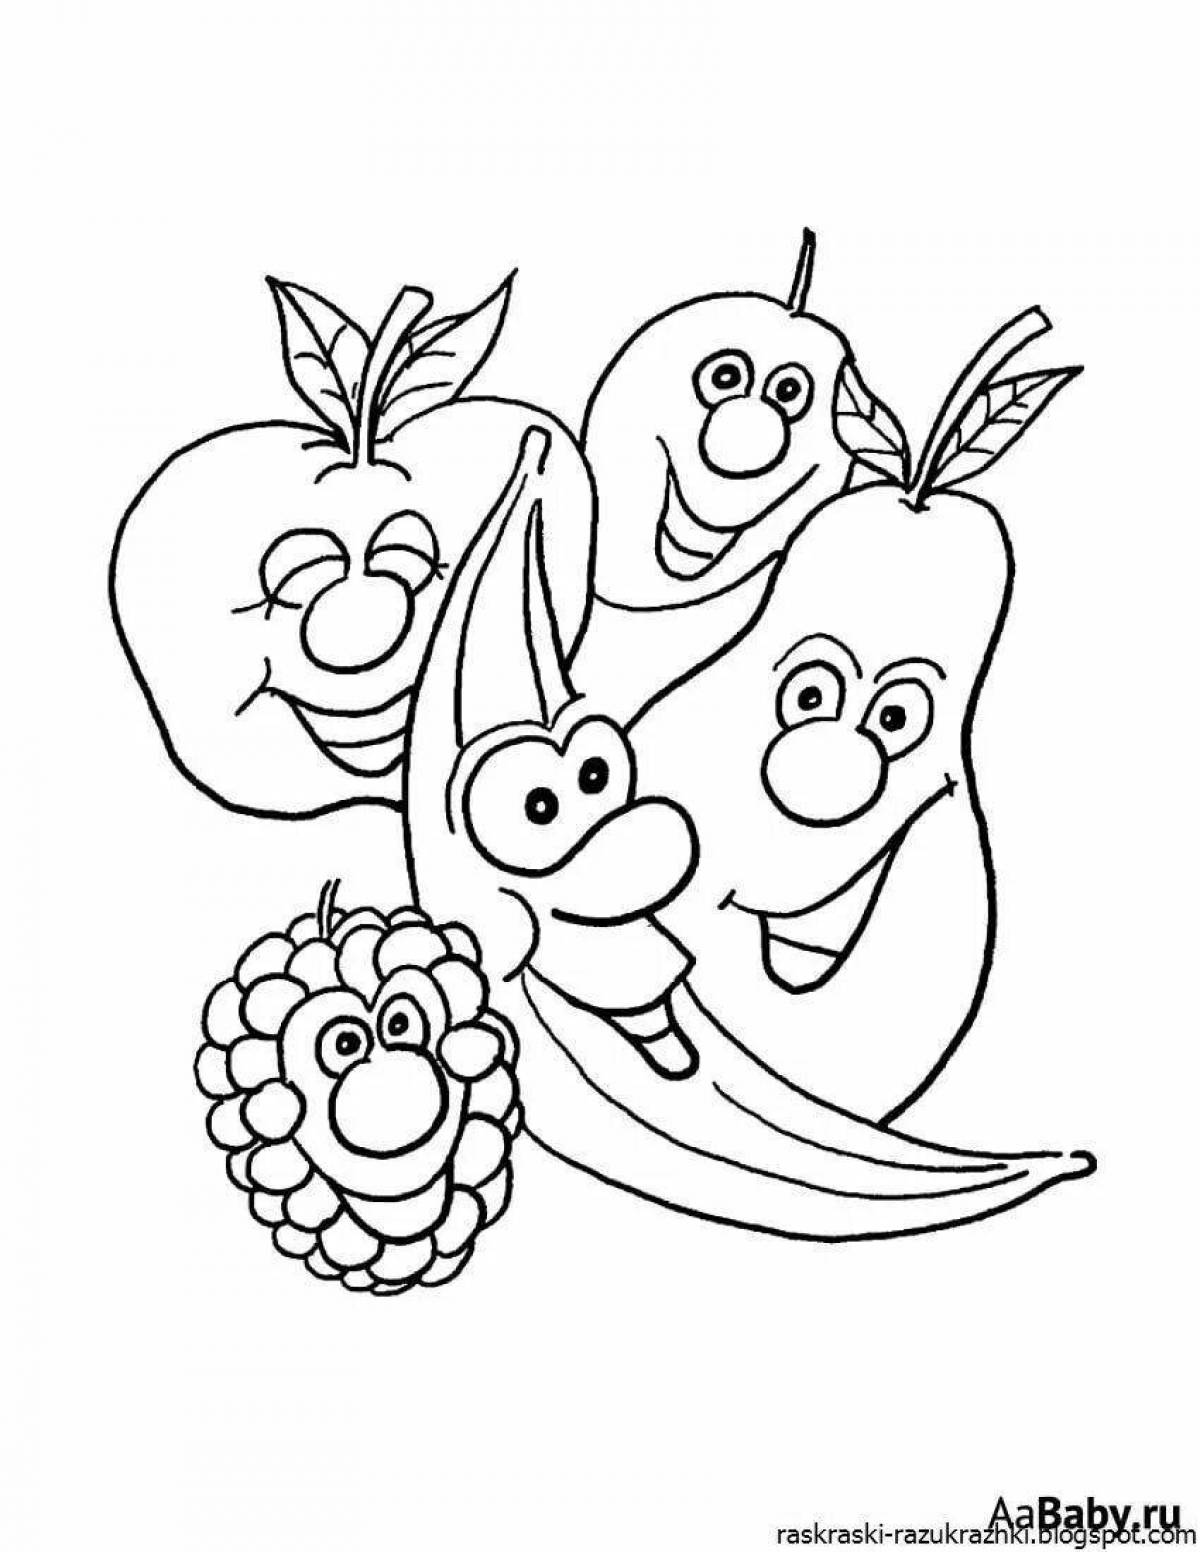 Colorful and entertaining coloring pages with fruits for children 5-6 years old